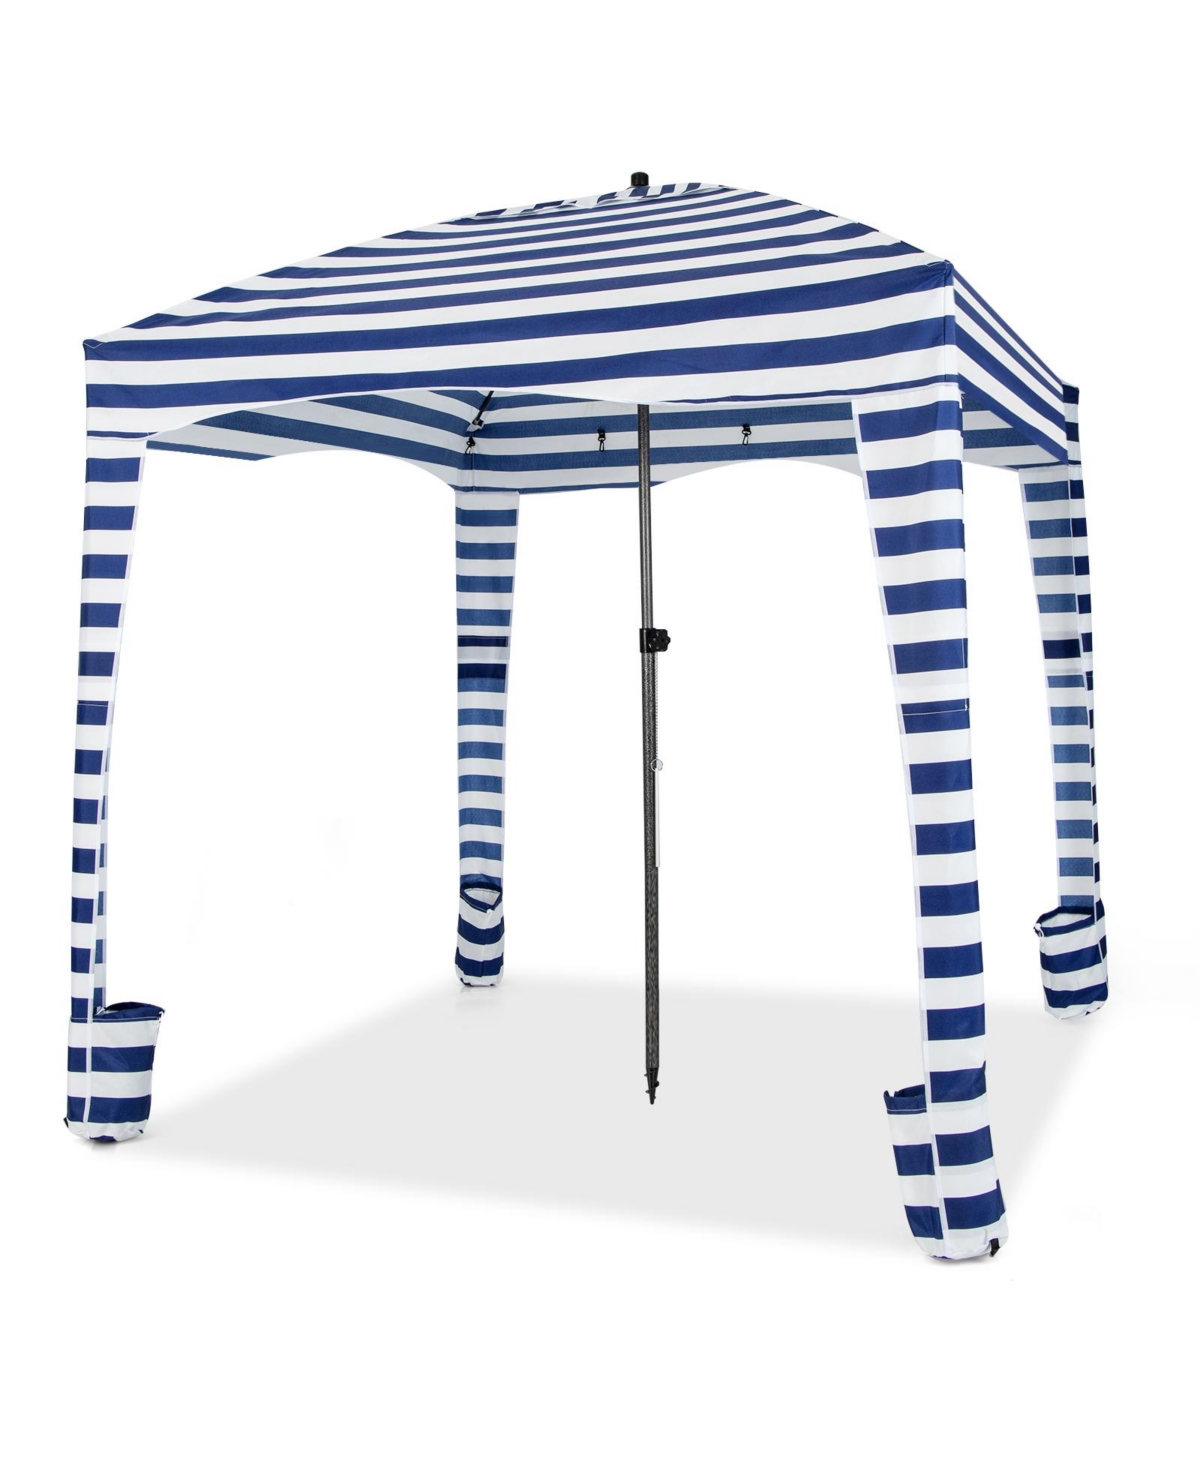 6 x 6FT Foldable Beach Cabana Tent with Carrying Bag Detachable Sidewall - Blue